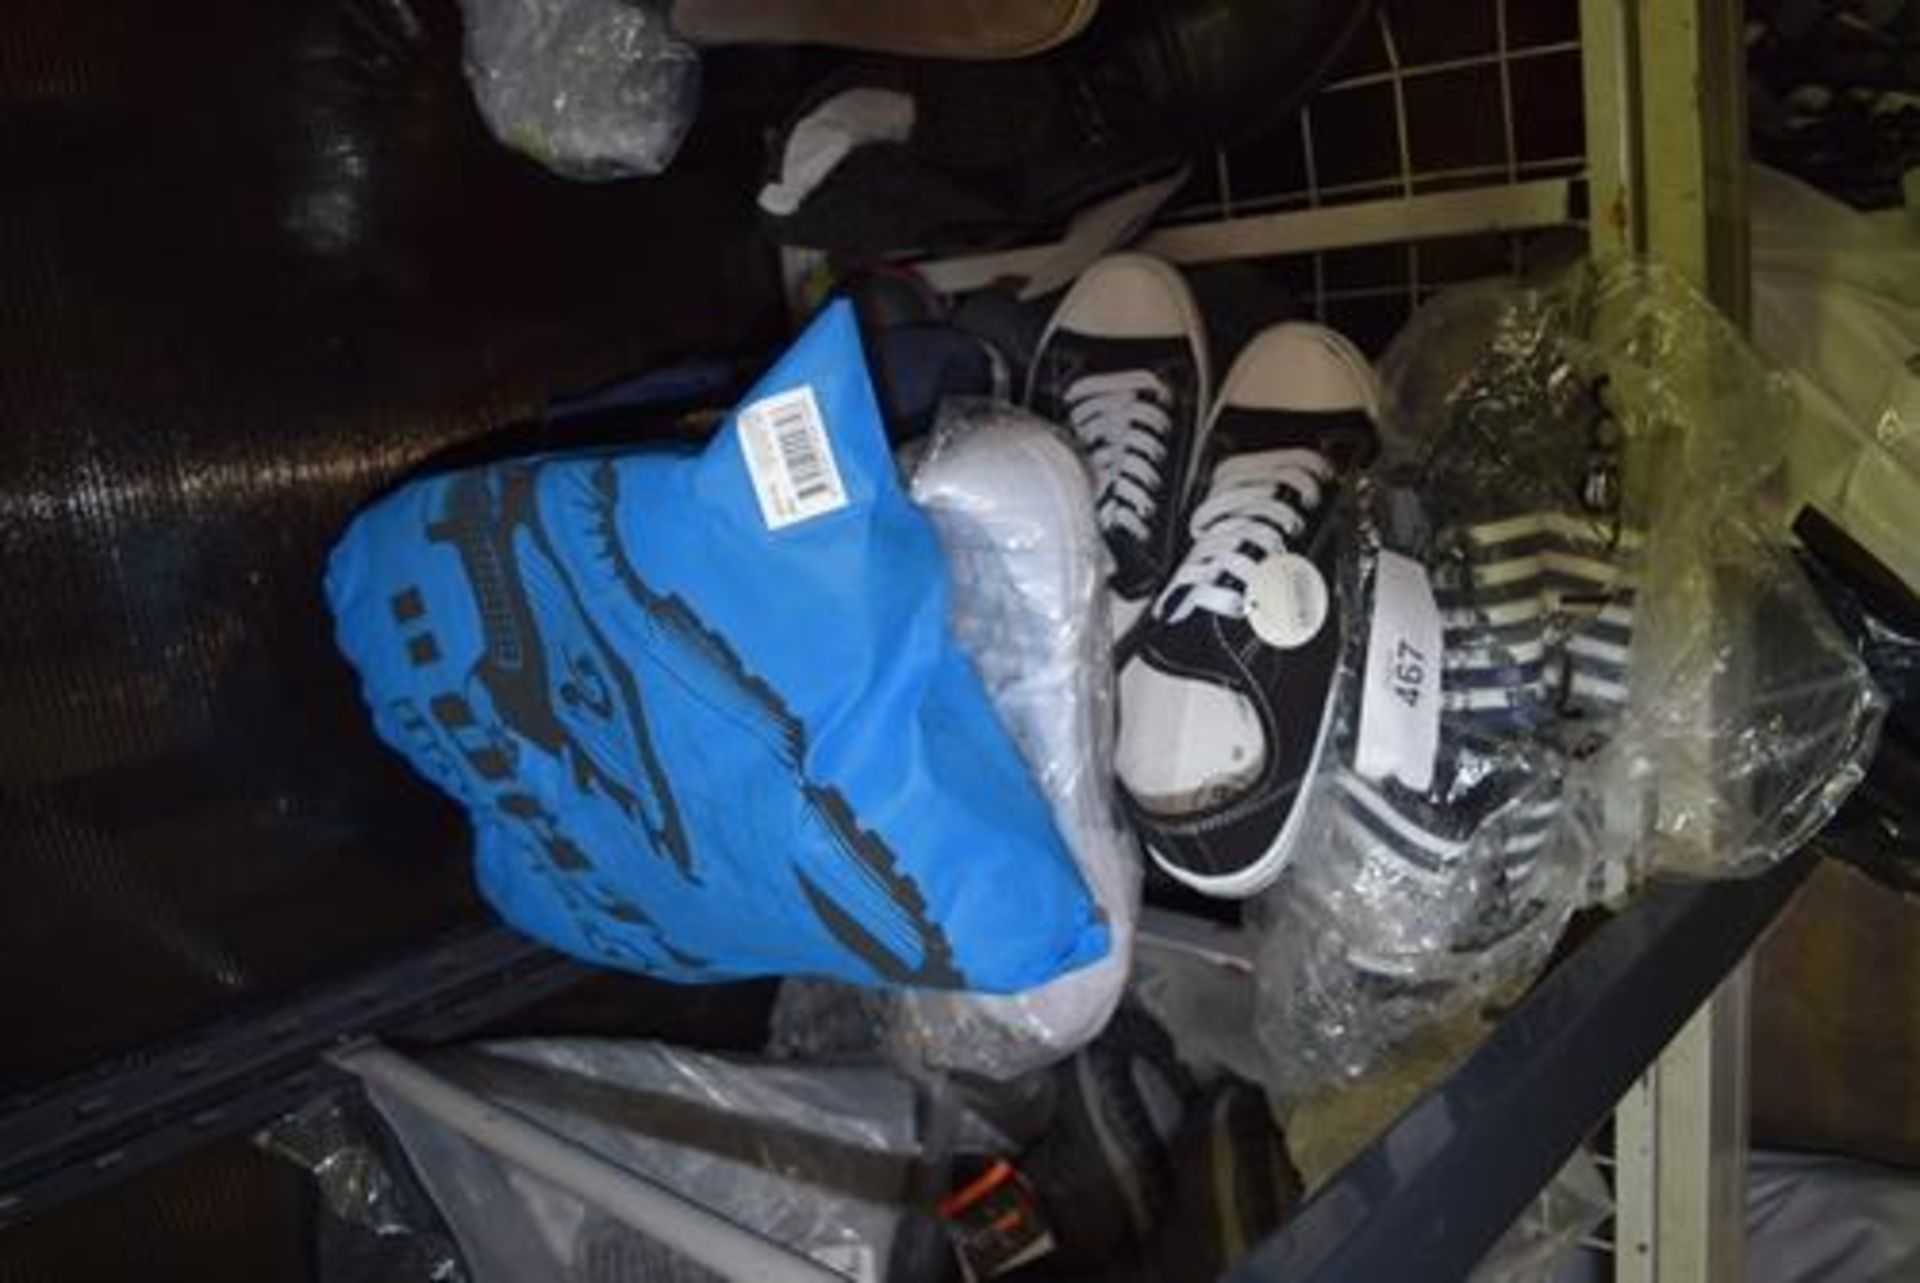 A quantity of trainers/casual wear shoes, brands include Adidas, Gryphon Aero trainers, Dec etc. -